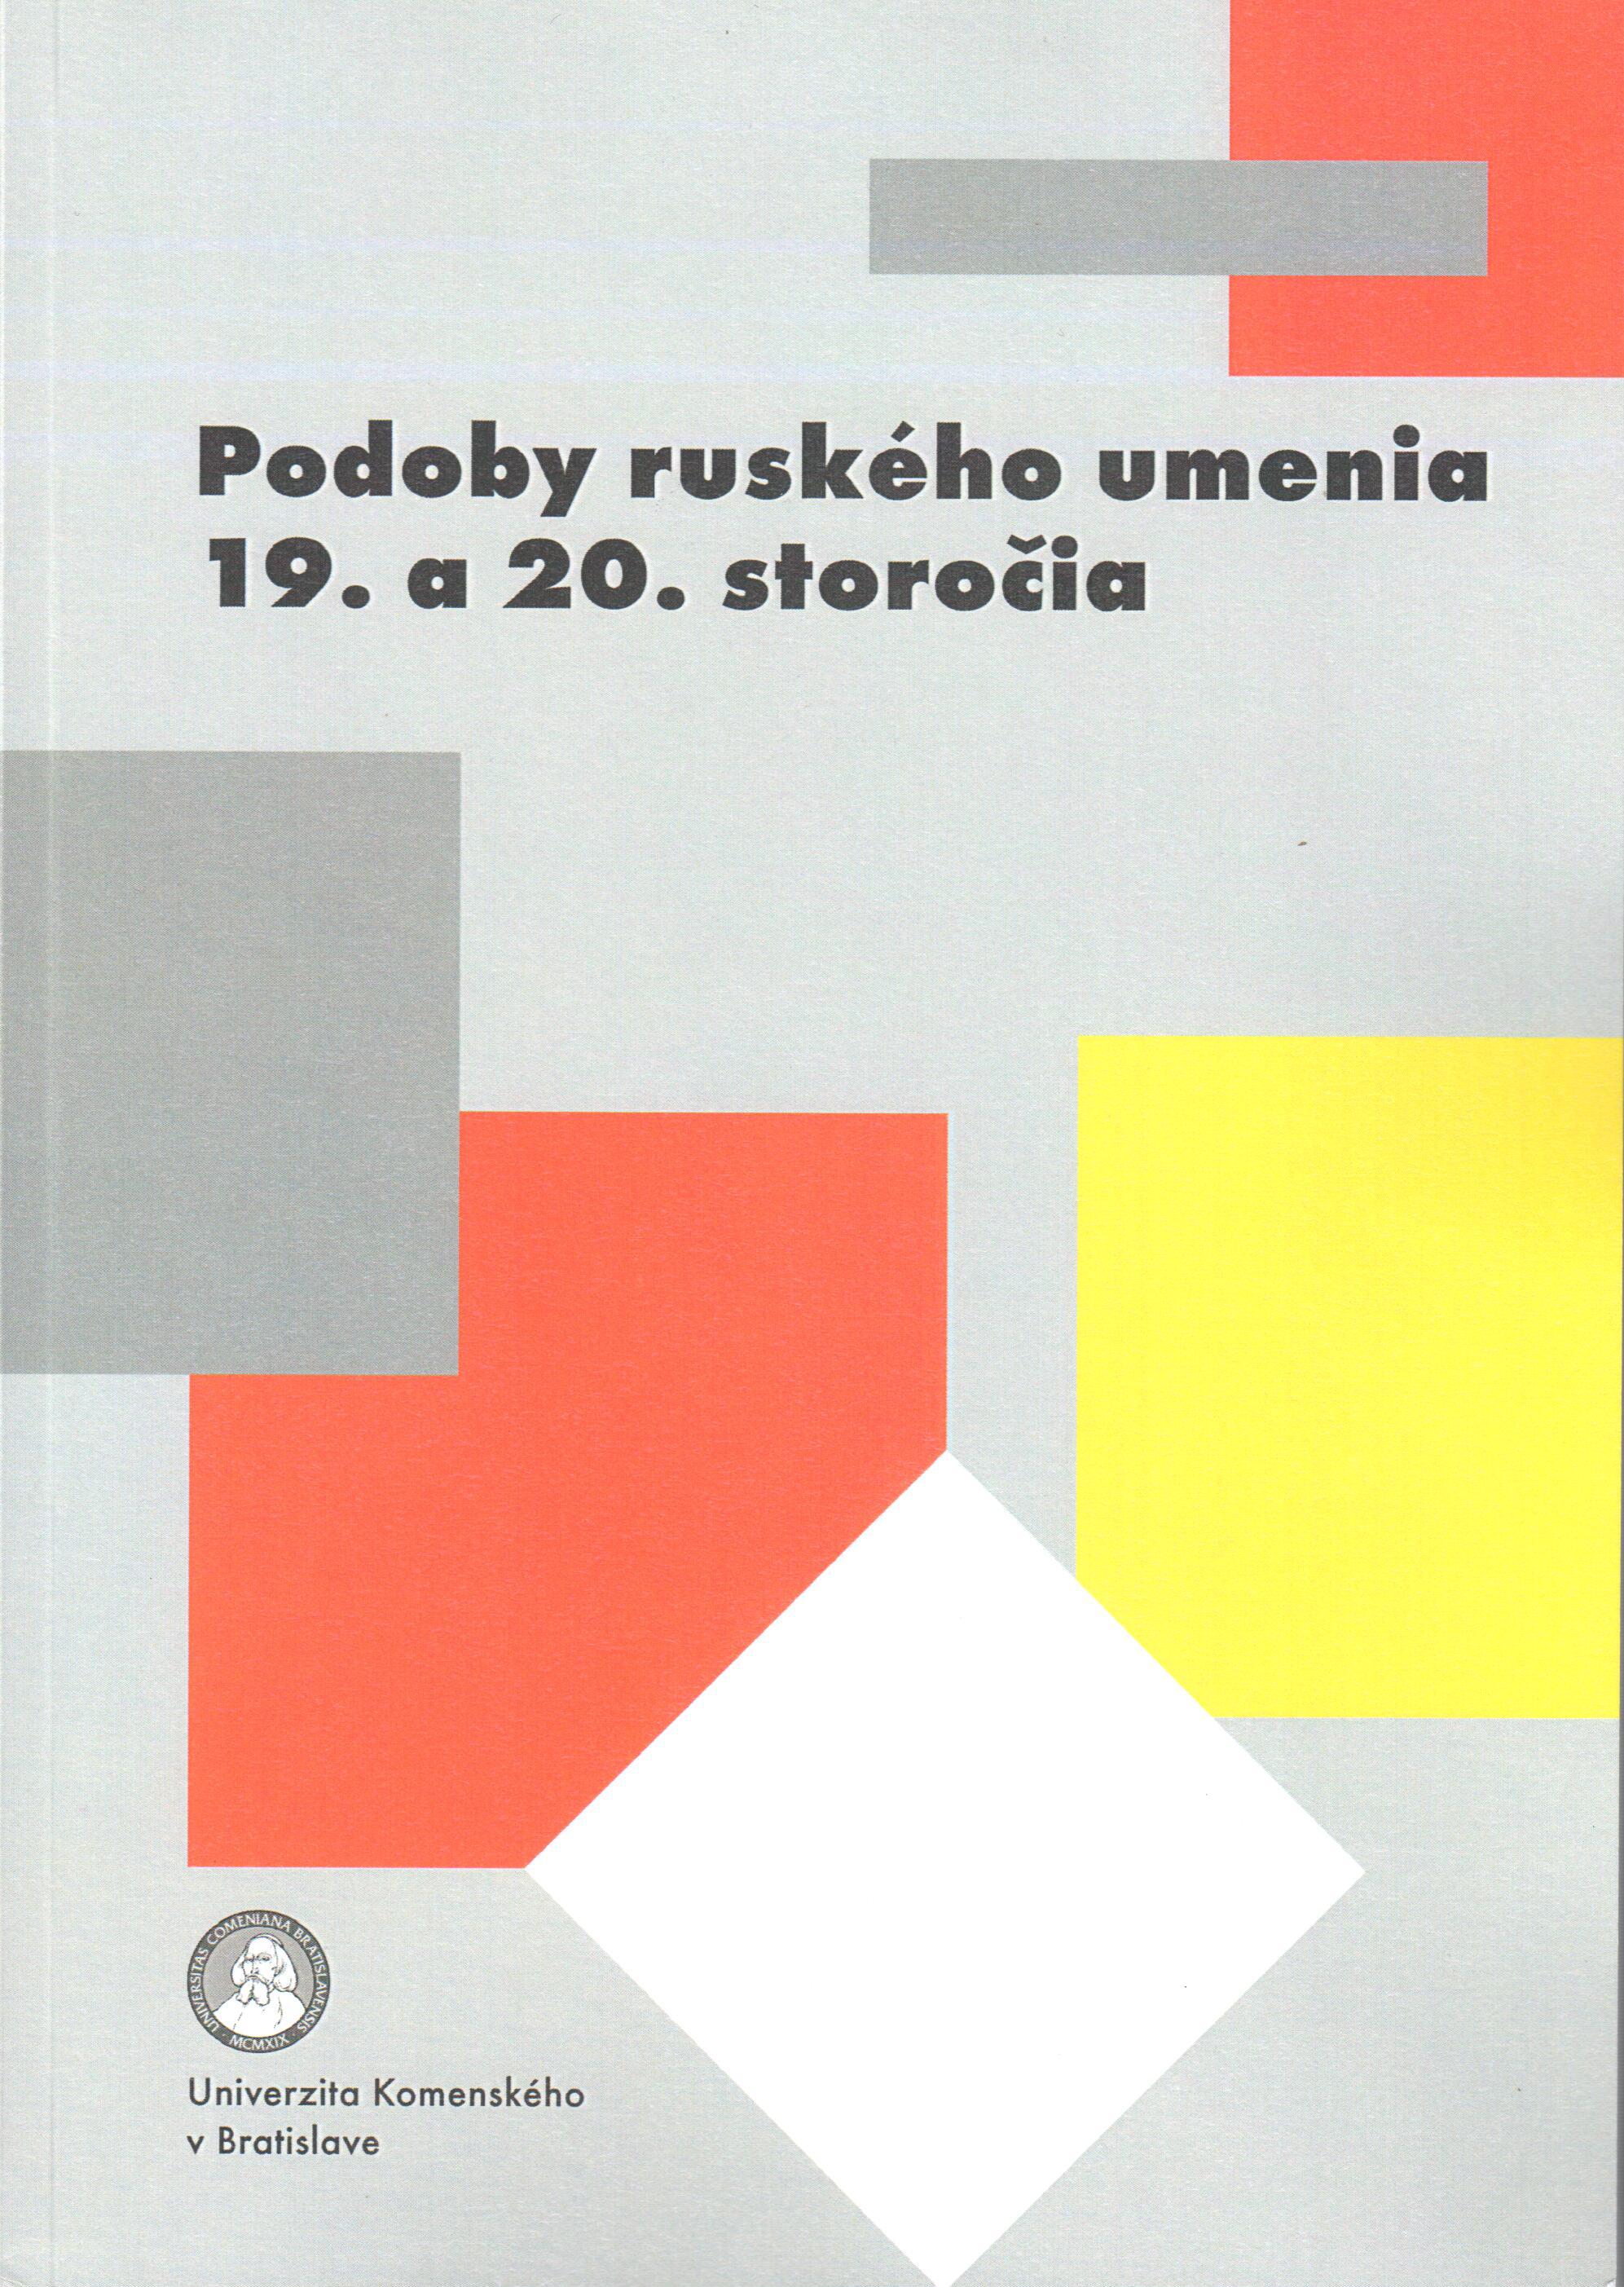 Podoby ruského umenia 19. a 20. storočia: Key Developmental Stages of the Russian Arts of the 19th and 20th centuries and their Resonance in the European Cultural Space